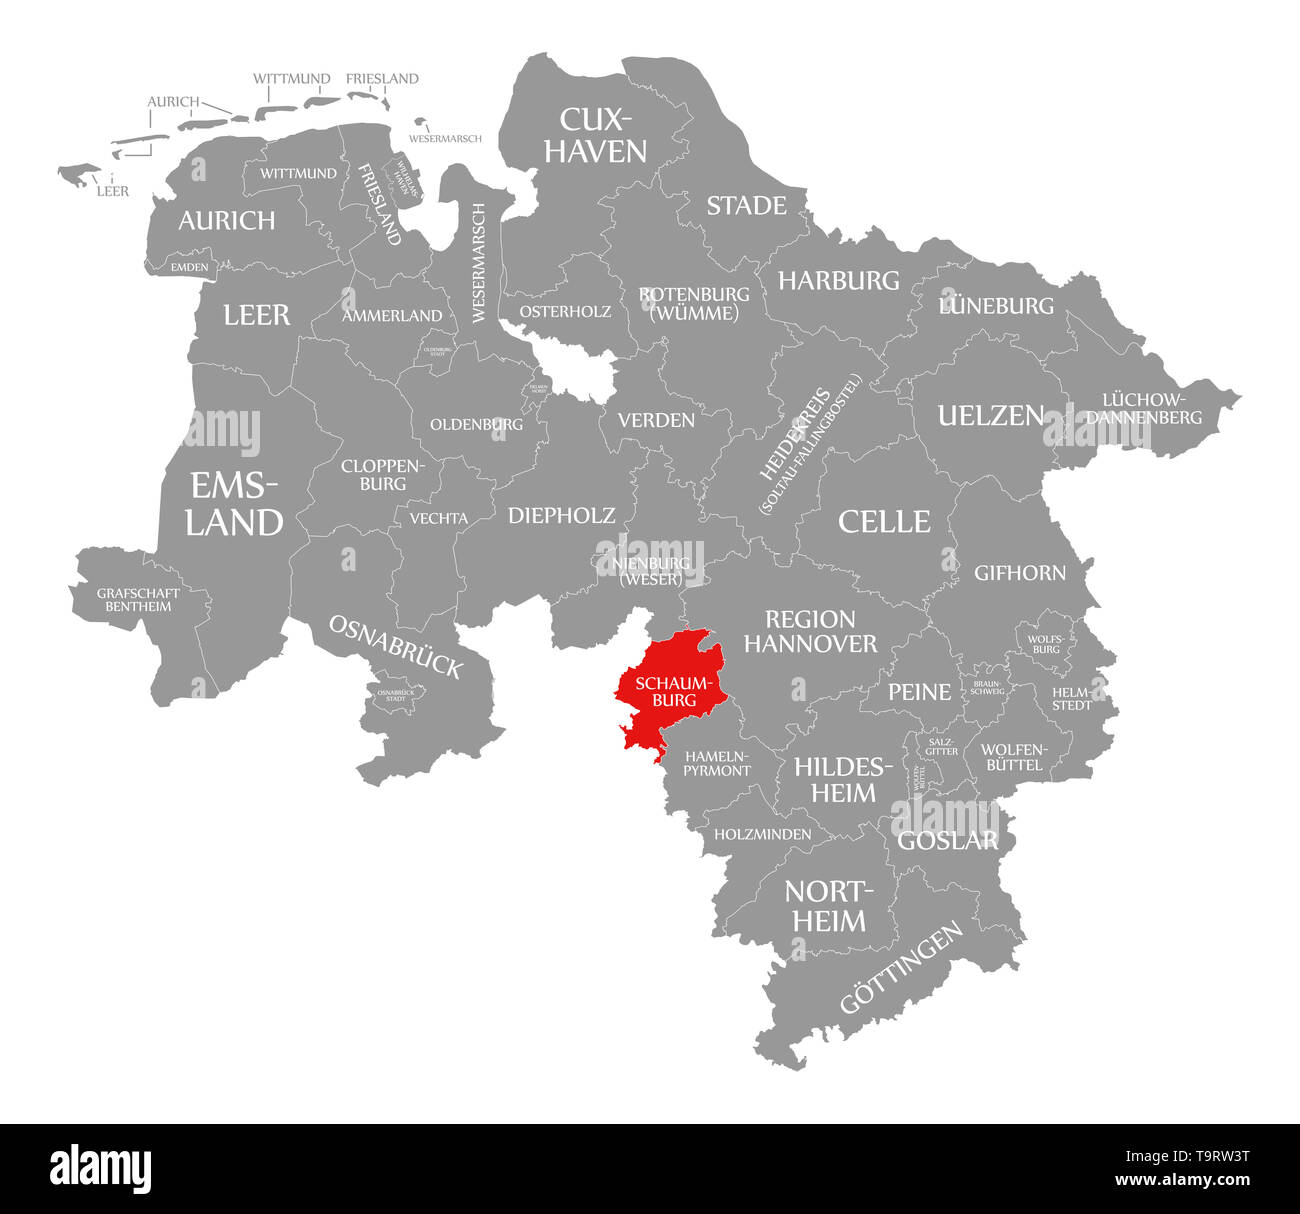 Schaumburg county red highlighted in map of Lower Saxony Germany Stock Photo